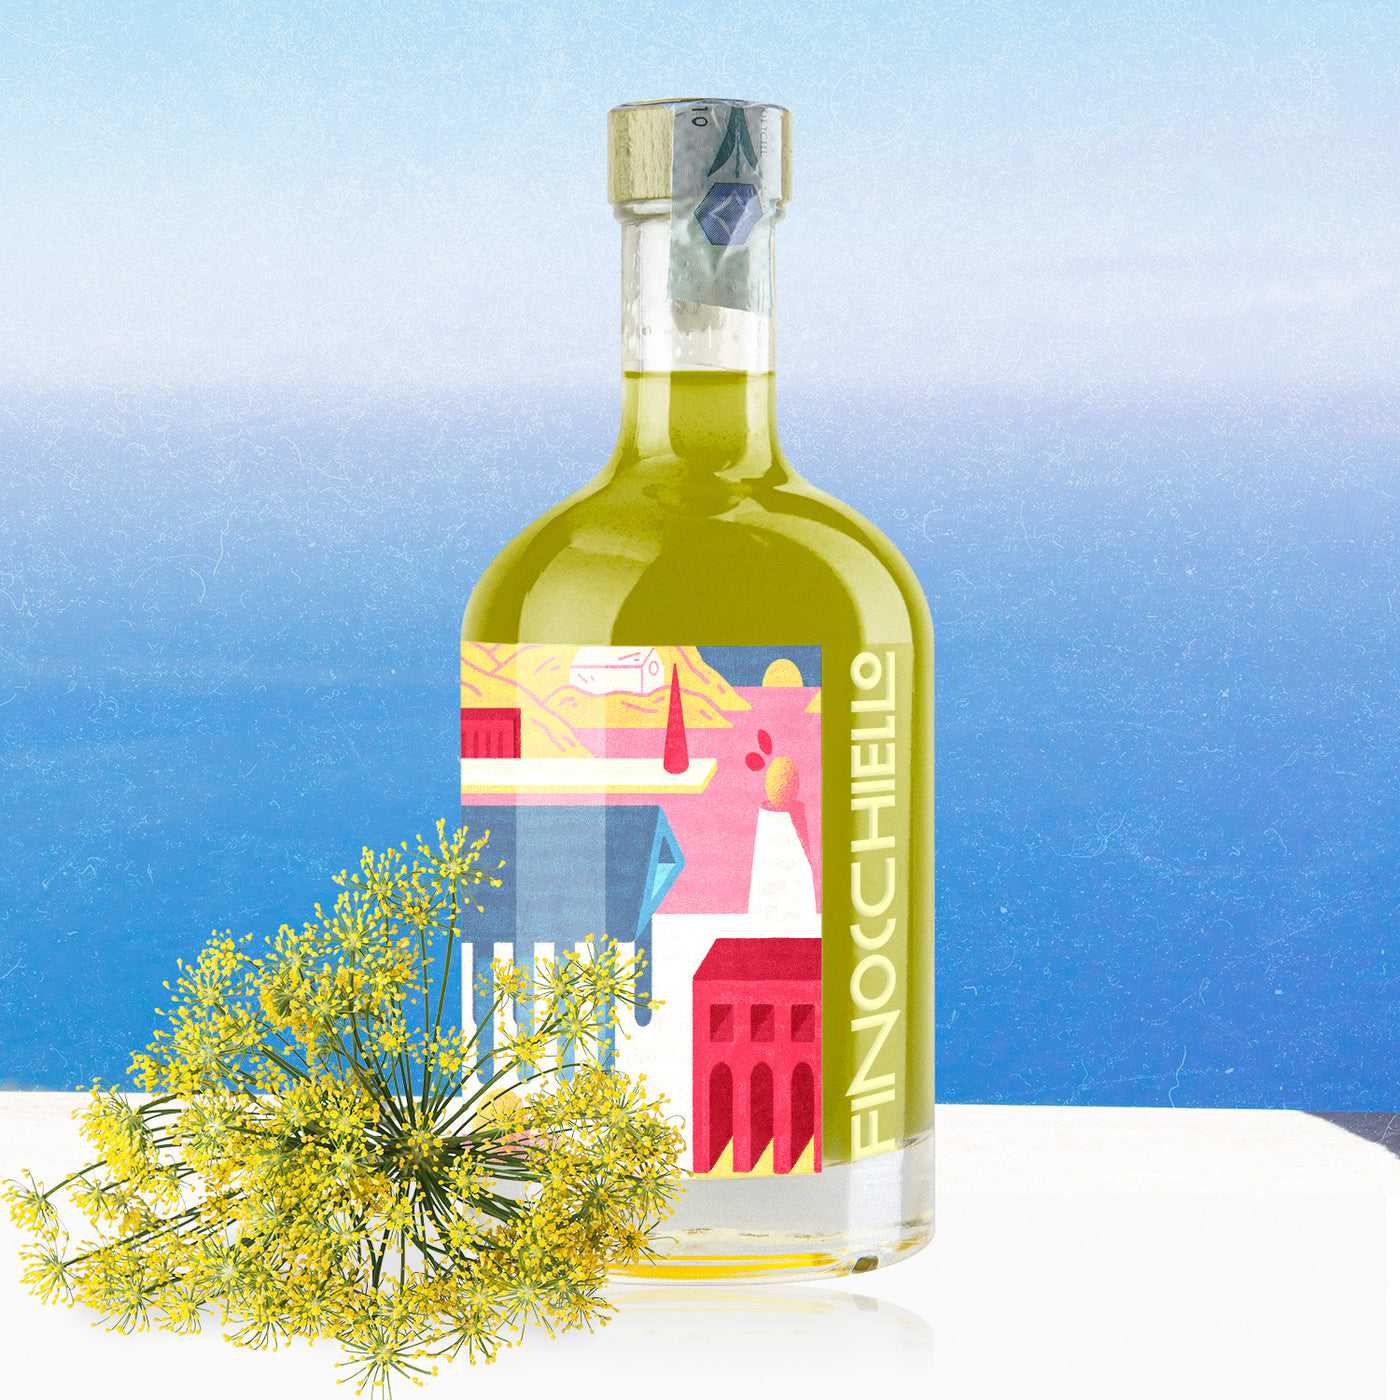 'Maiori' Wild Fennel - Italian Digestive crafted liqueur with Gift Box